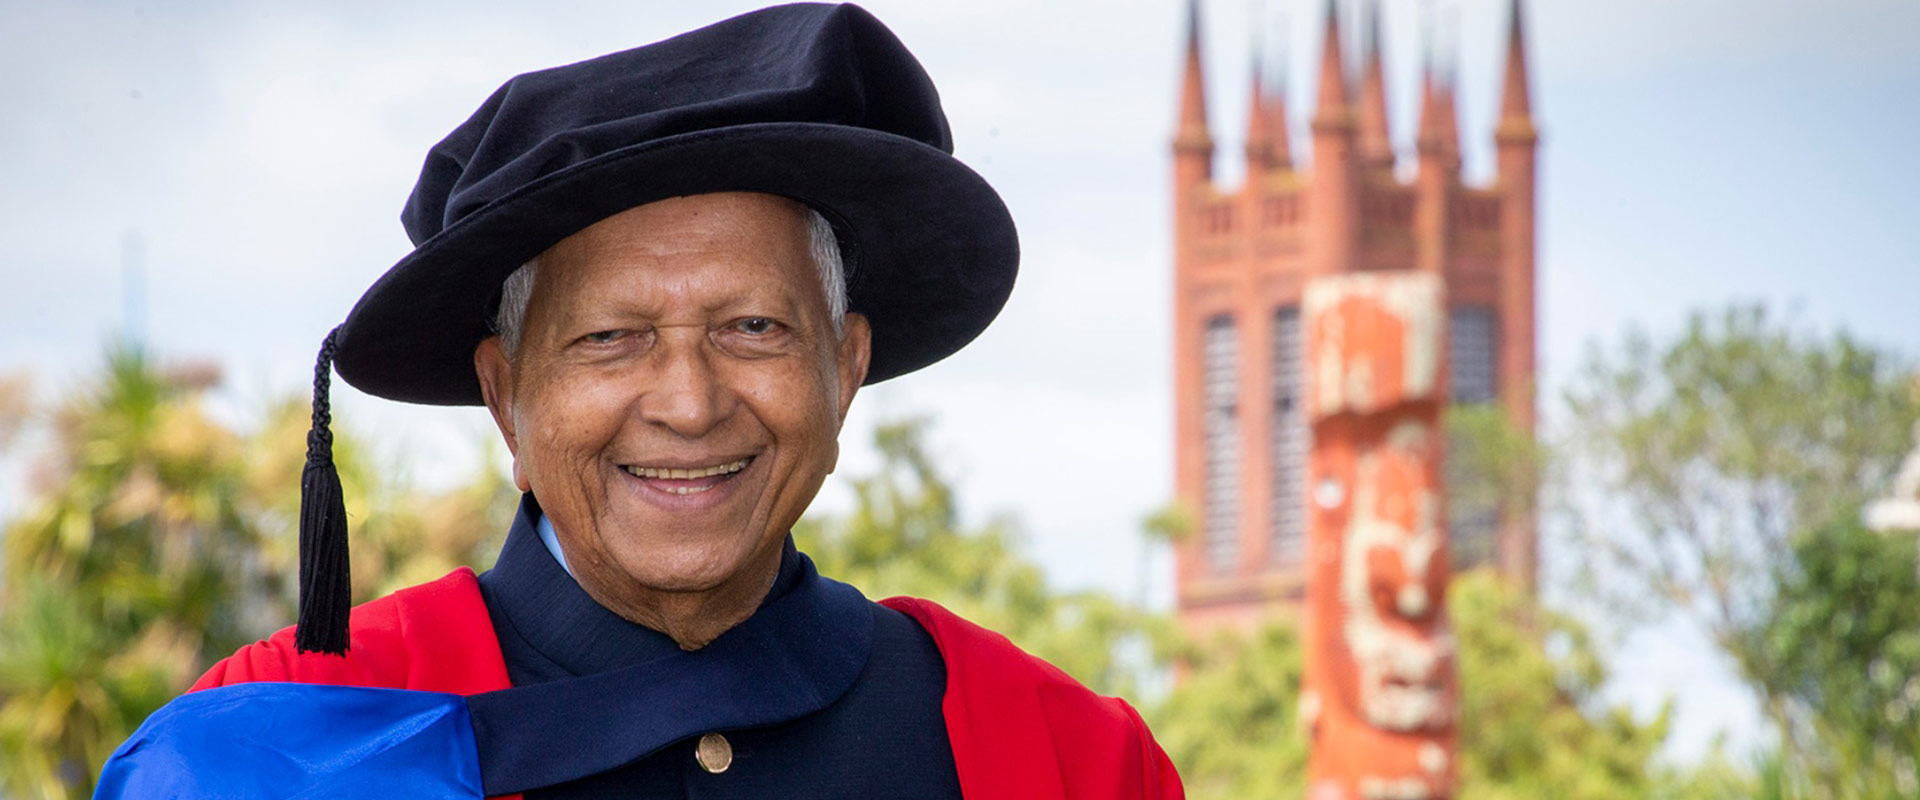 Dilmah Tea Founder Merrill J. Fernando has been capped as a Doctor of Science by Massey